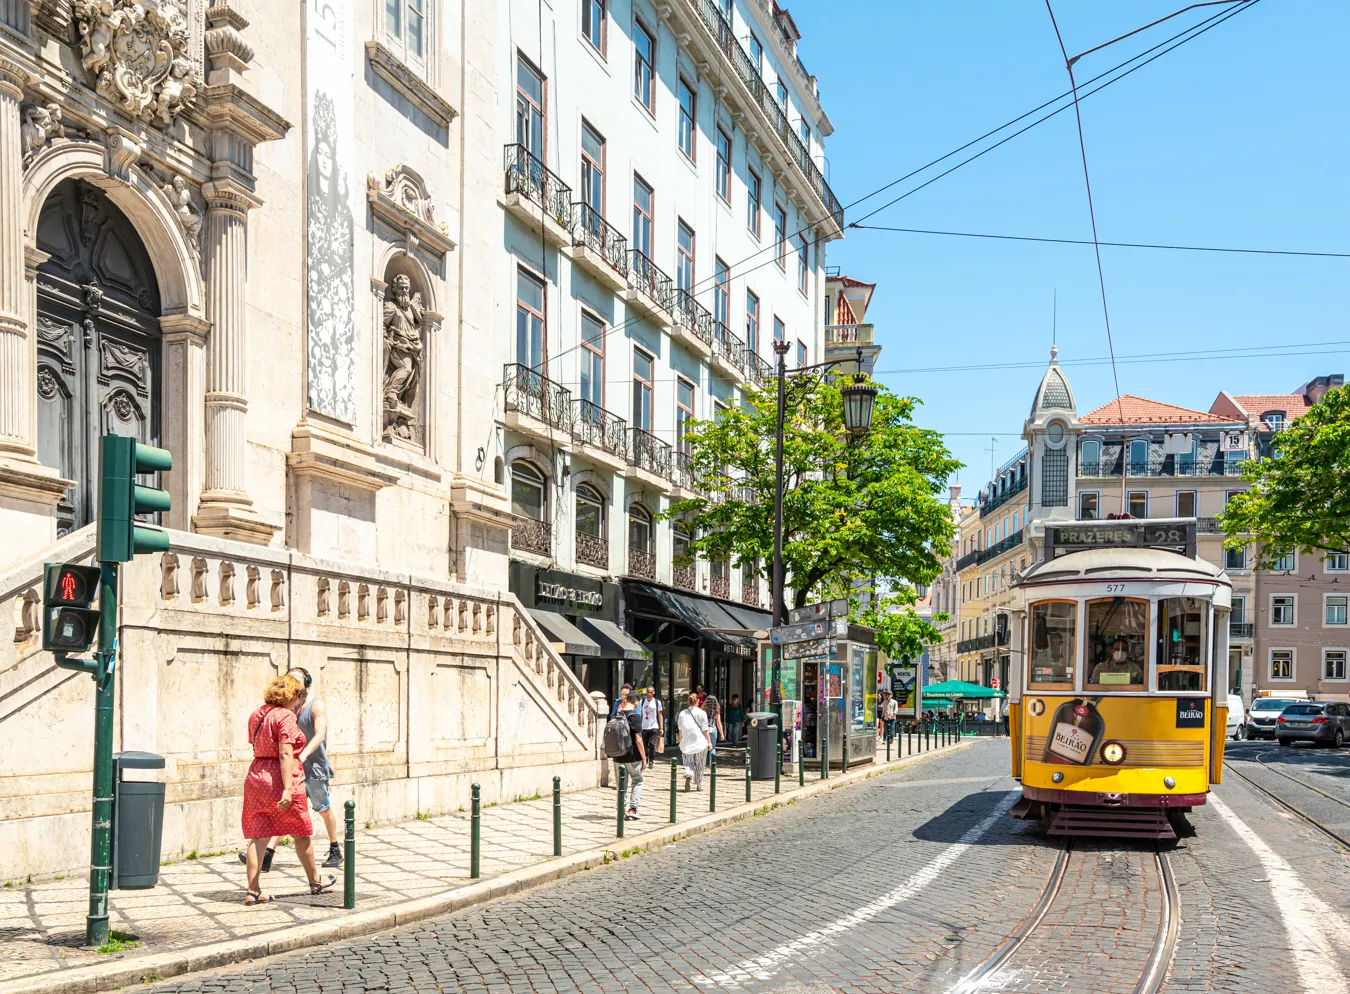 view of a yellow tram approaching the camera next to a church in lisbon, one of the many typical views to look forward to when planning a trip to portugal